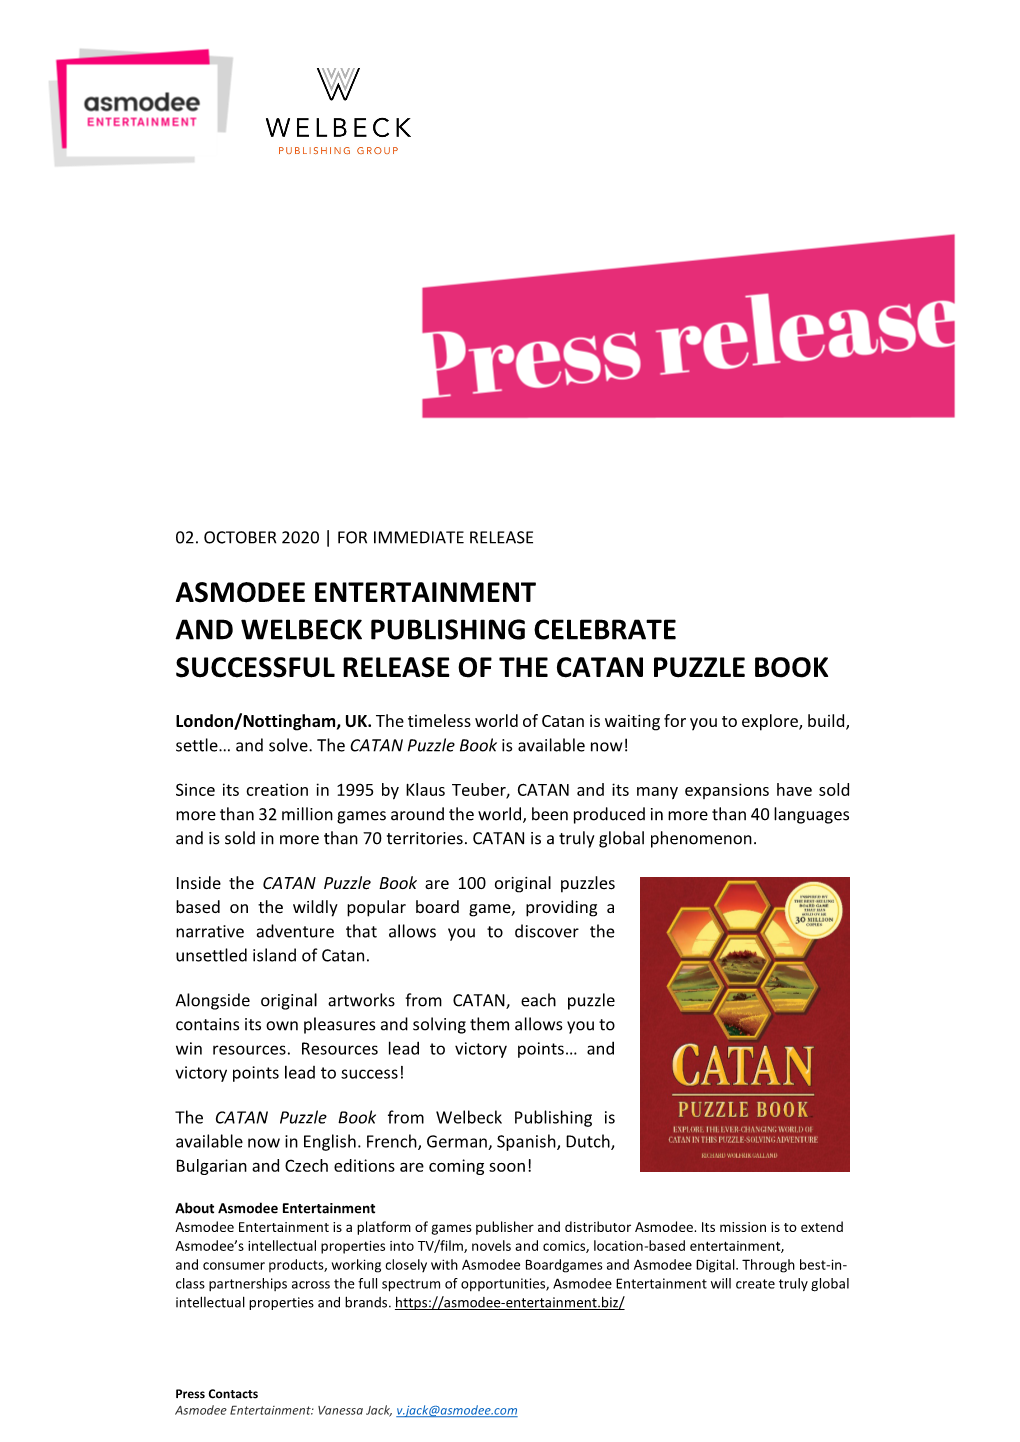 Asmodee Entertainment and Welbeck Publishing Celebrate Successful Release of the Catan Puzzle Book